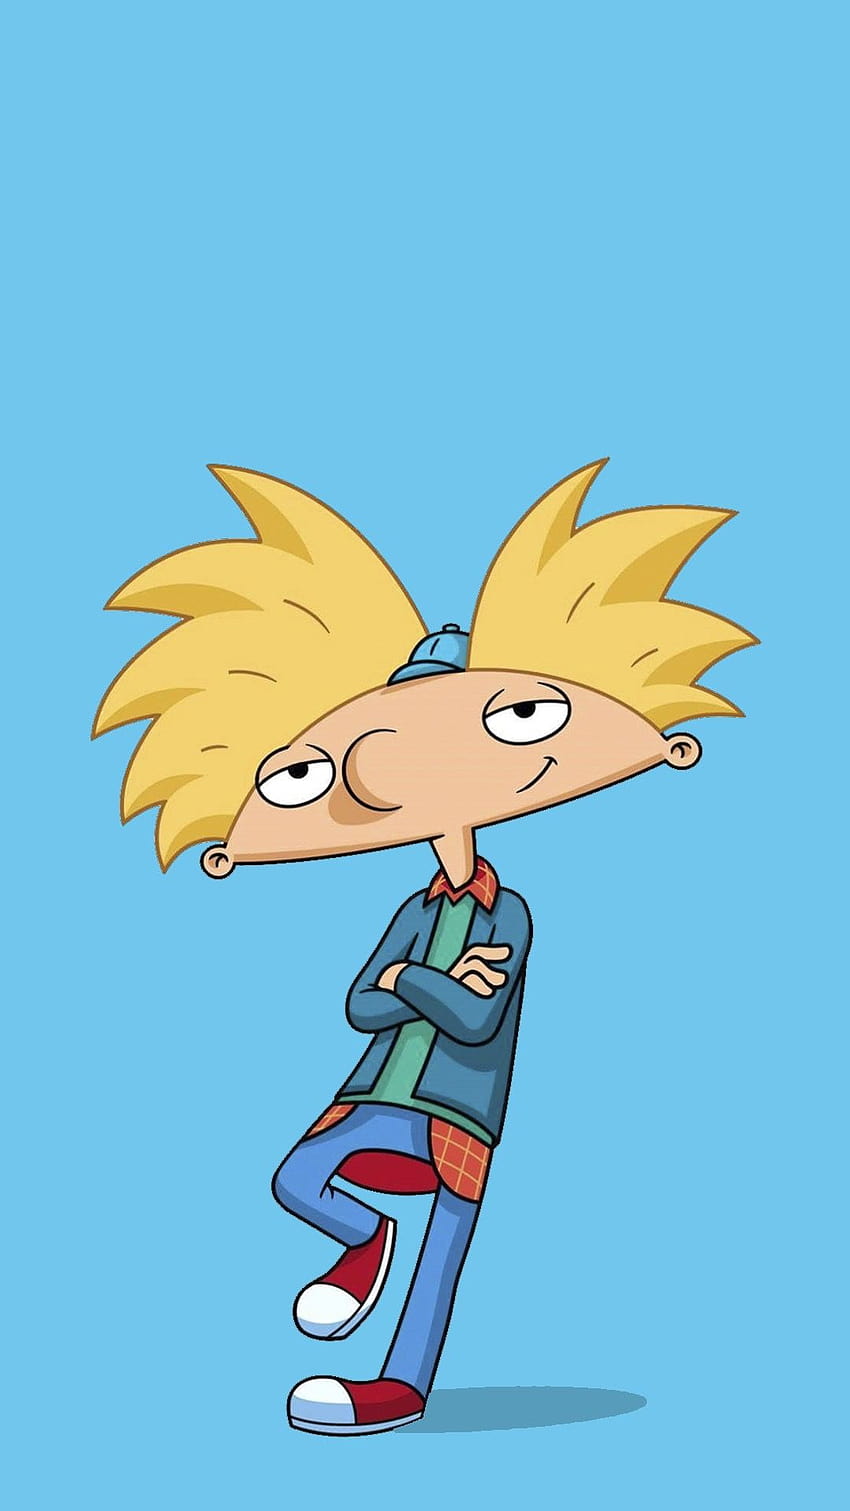 Sunlight on Hey arnold, hey arnold mobile HD phone wallpaper